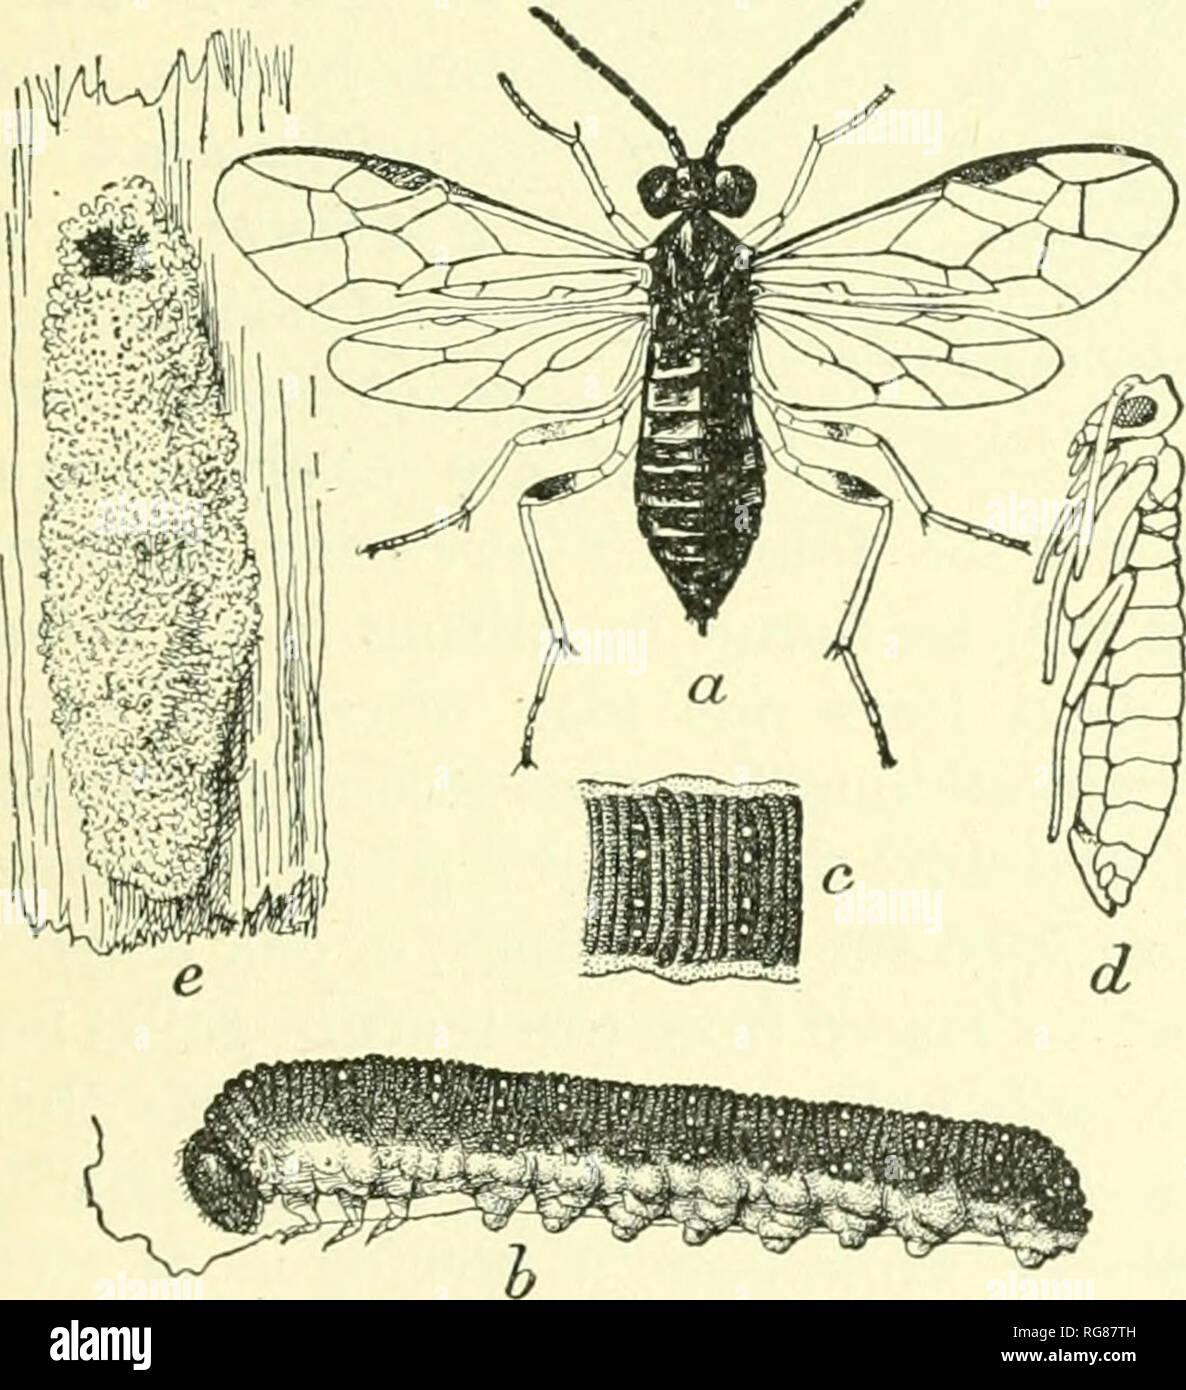 . Bulletin - United States National Museum. Science. Fig. 137.—A Pyralid moth, Pyralis fa- rinalis: a, Moth; b, caterpillar; c, pupa; d, e, f, details. Often one may find eggs attached to leaves, and from these one may rear and observe all the stages of the insect. A better way is to save captured gravid females and place them in a cage, with a probable food plant as an inducement to deposit their eggs. A bot- tomless barrel or nail keg placed over a plant and the top covered with mosquito netting makes a good cage. Various other cages are described in the chapter on rearing. The Microlepidopt Stock Photo